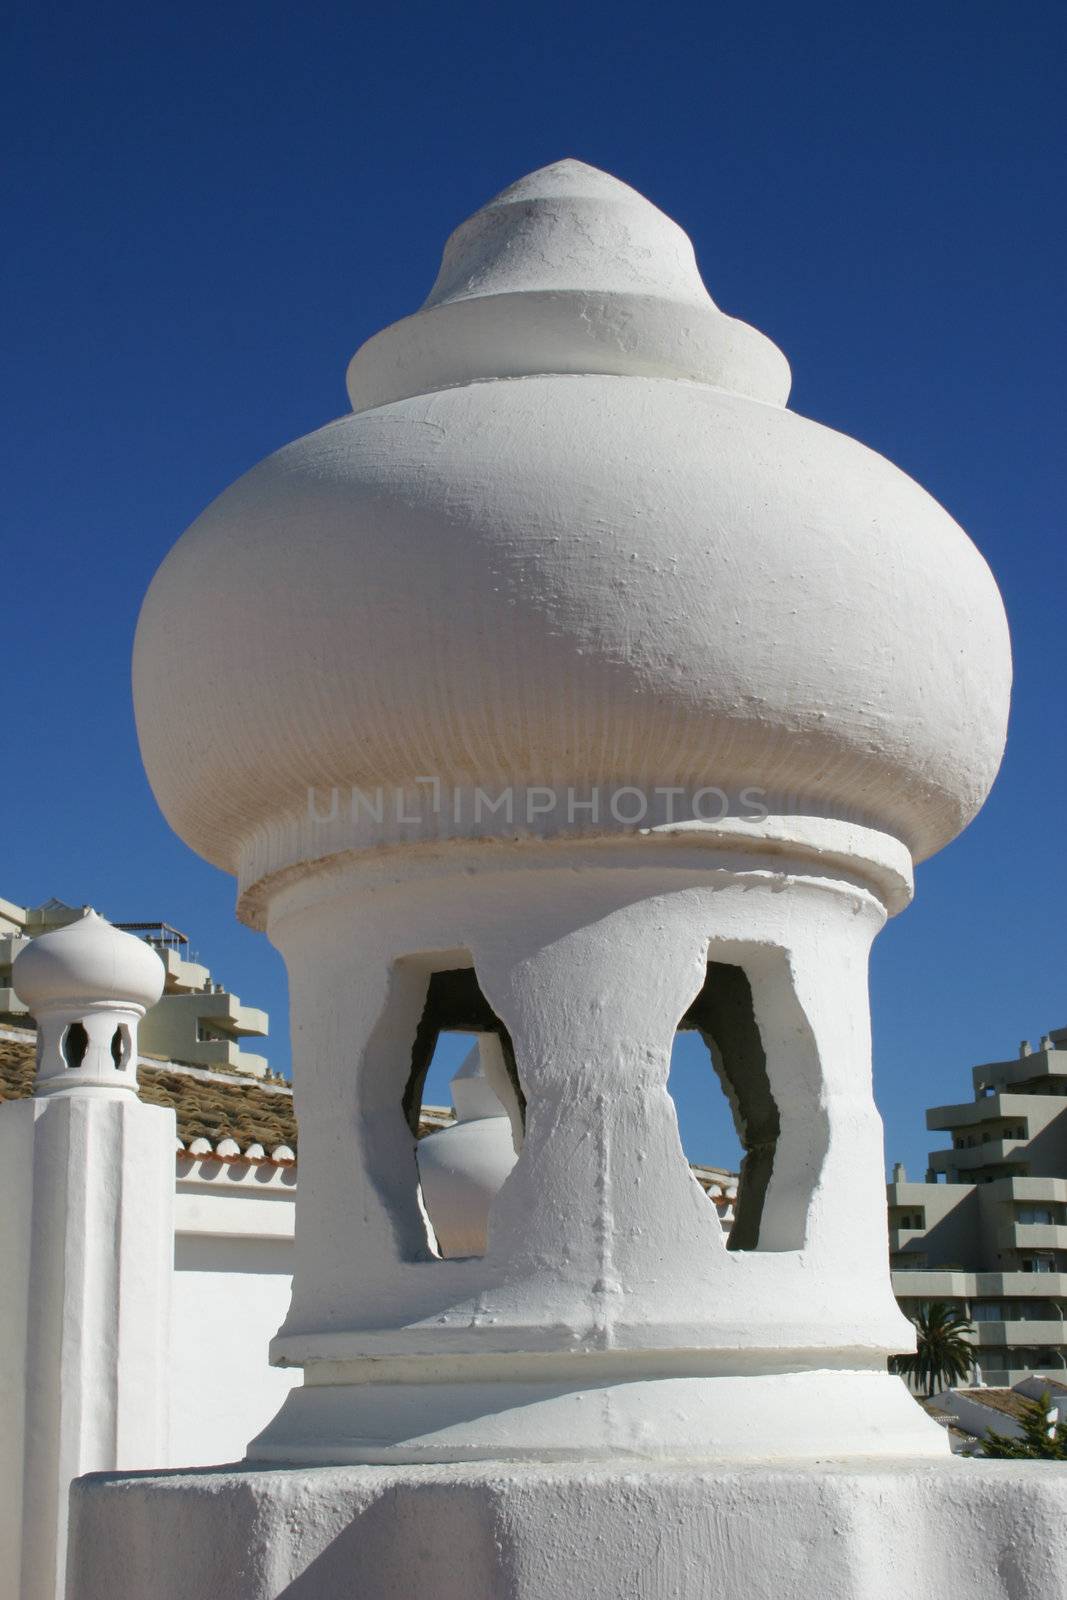 dome structure on a building painted white